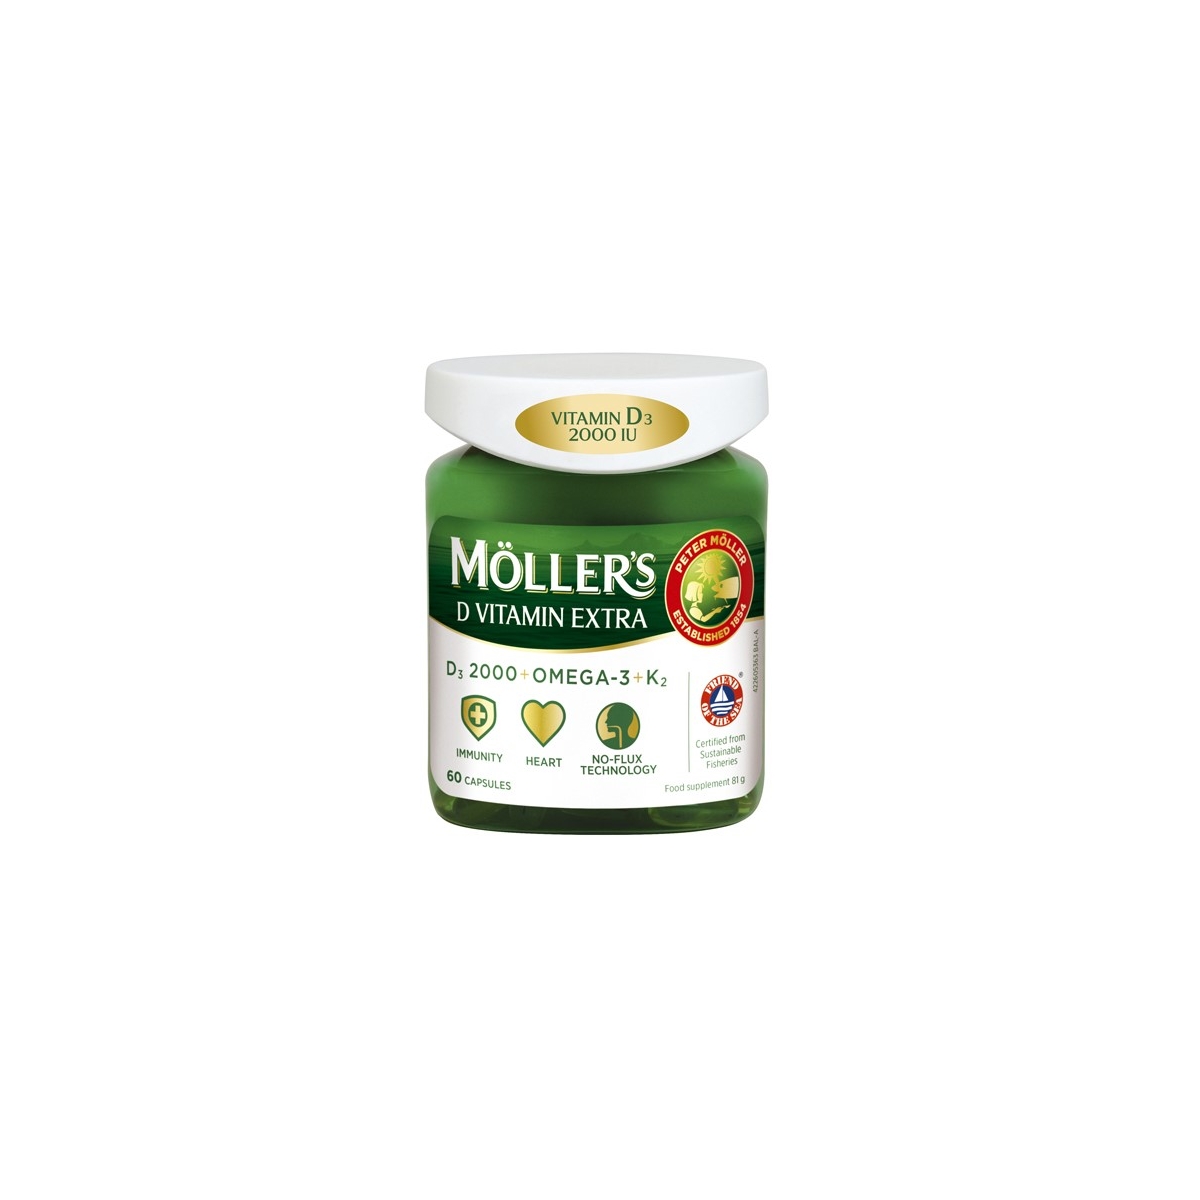 MOLLERS D VITAMINT EXTRA N60